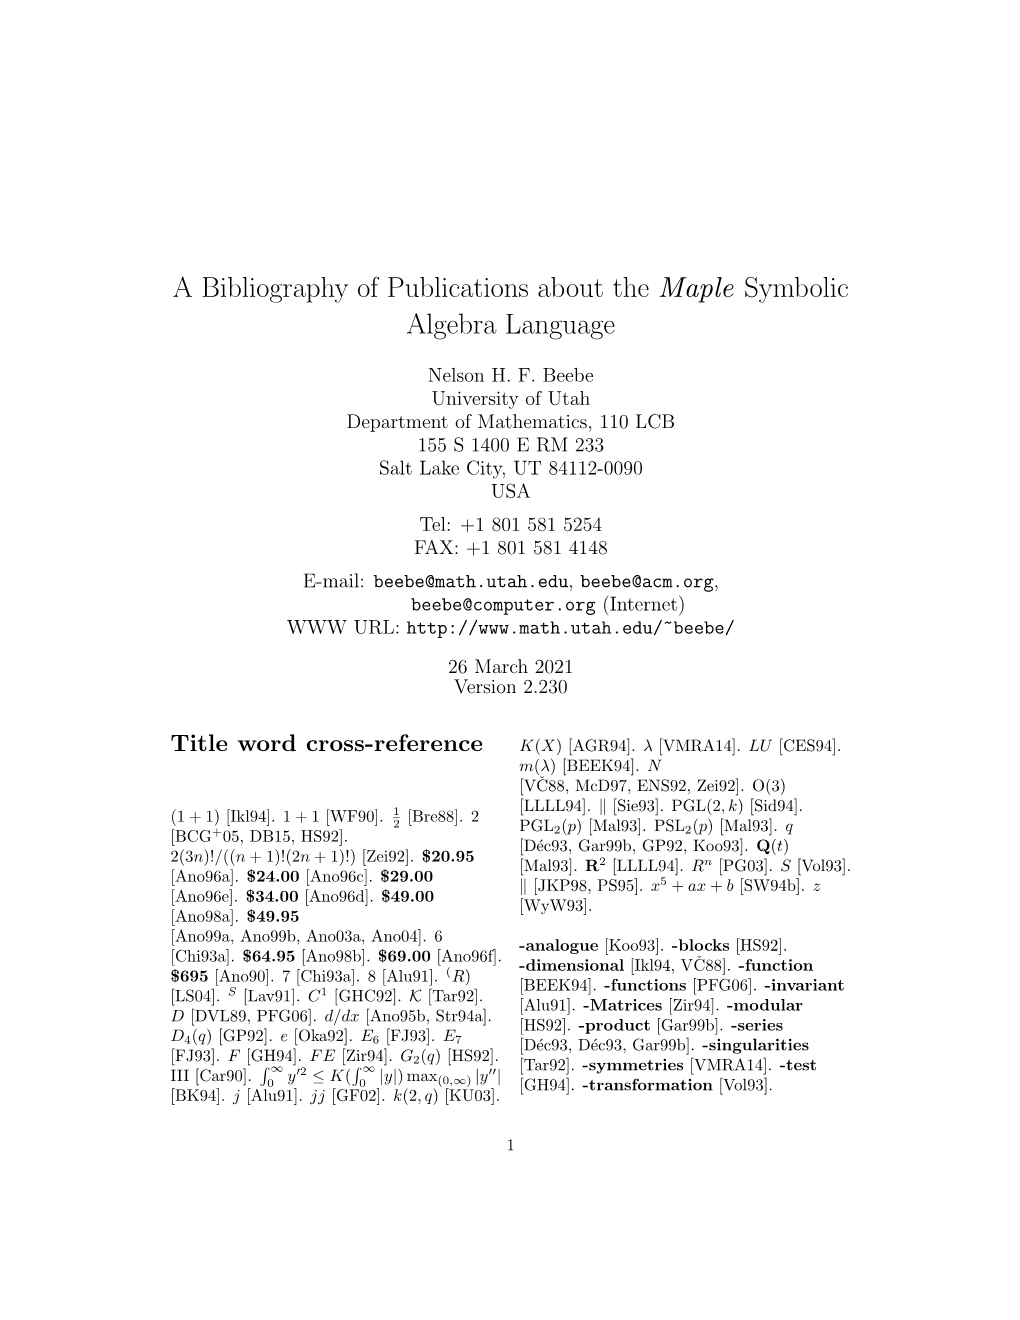 A Bibliography of Publications About the Maple Symbolic Algebra Language